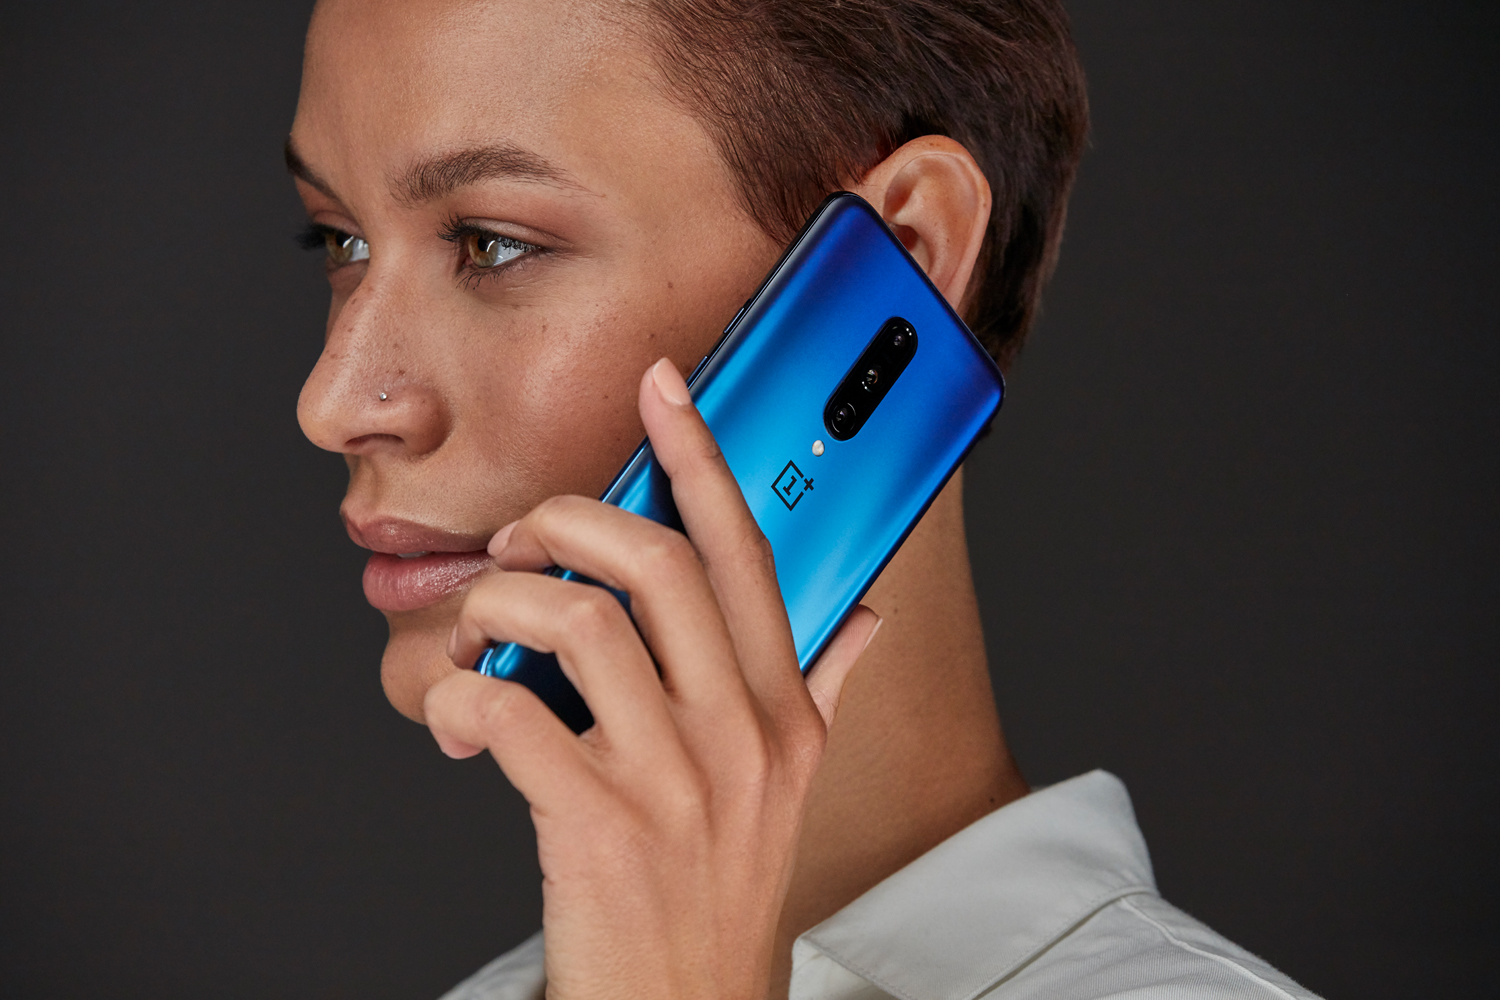 Person with Nebula Blue OnePlus 7 Pro smartphone